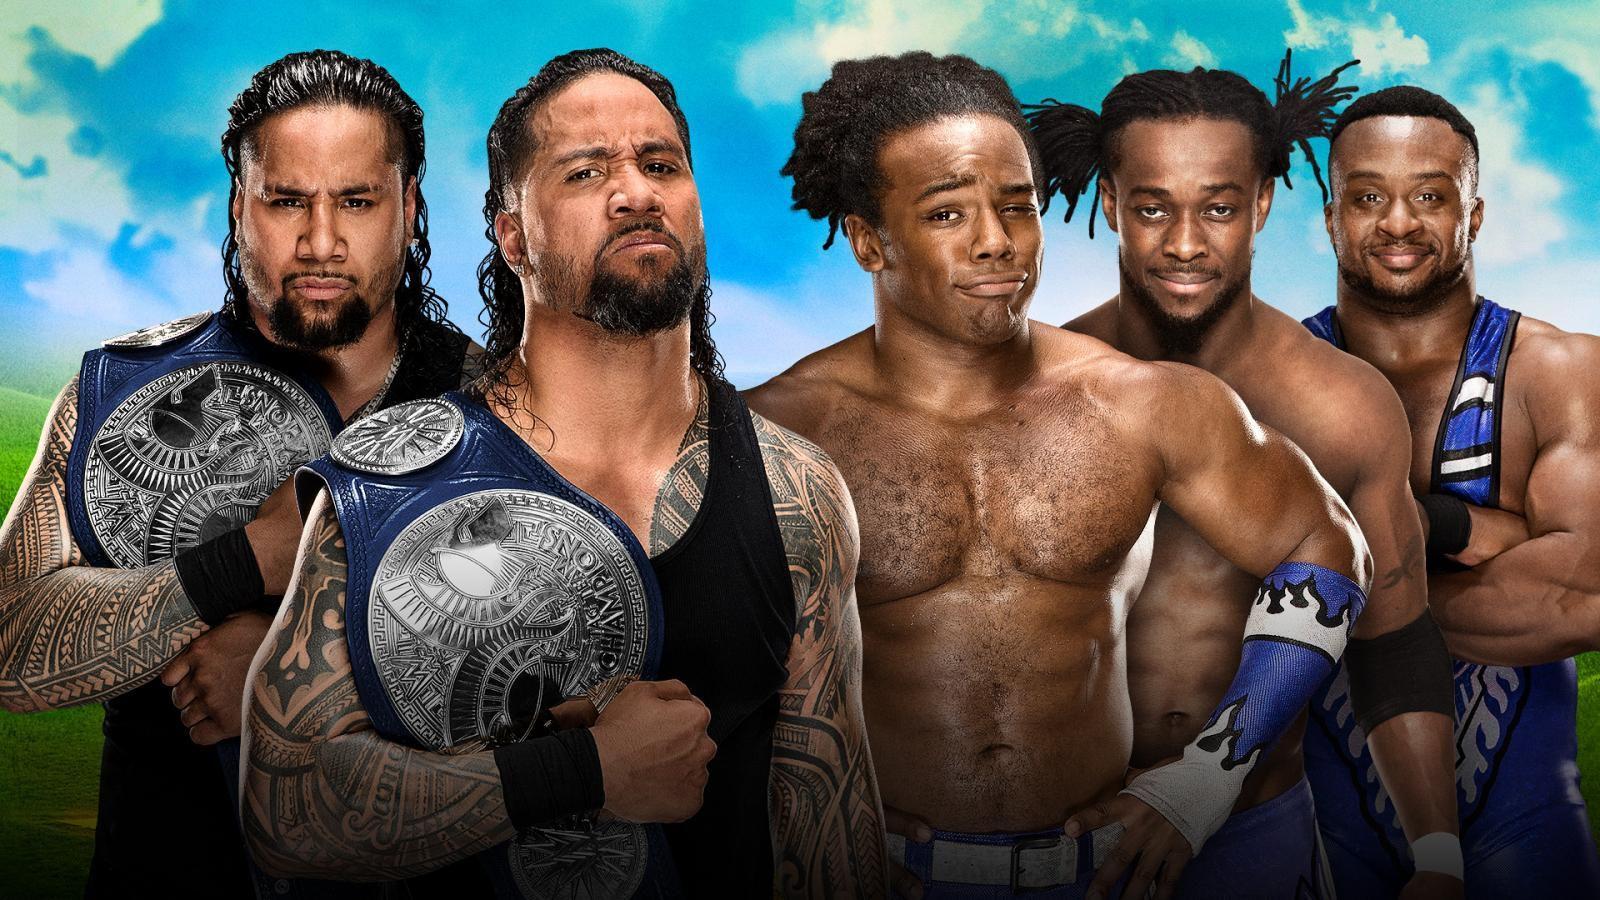 WWE Money in the Bank 2017: New Day vs. the Usos full match